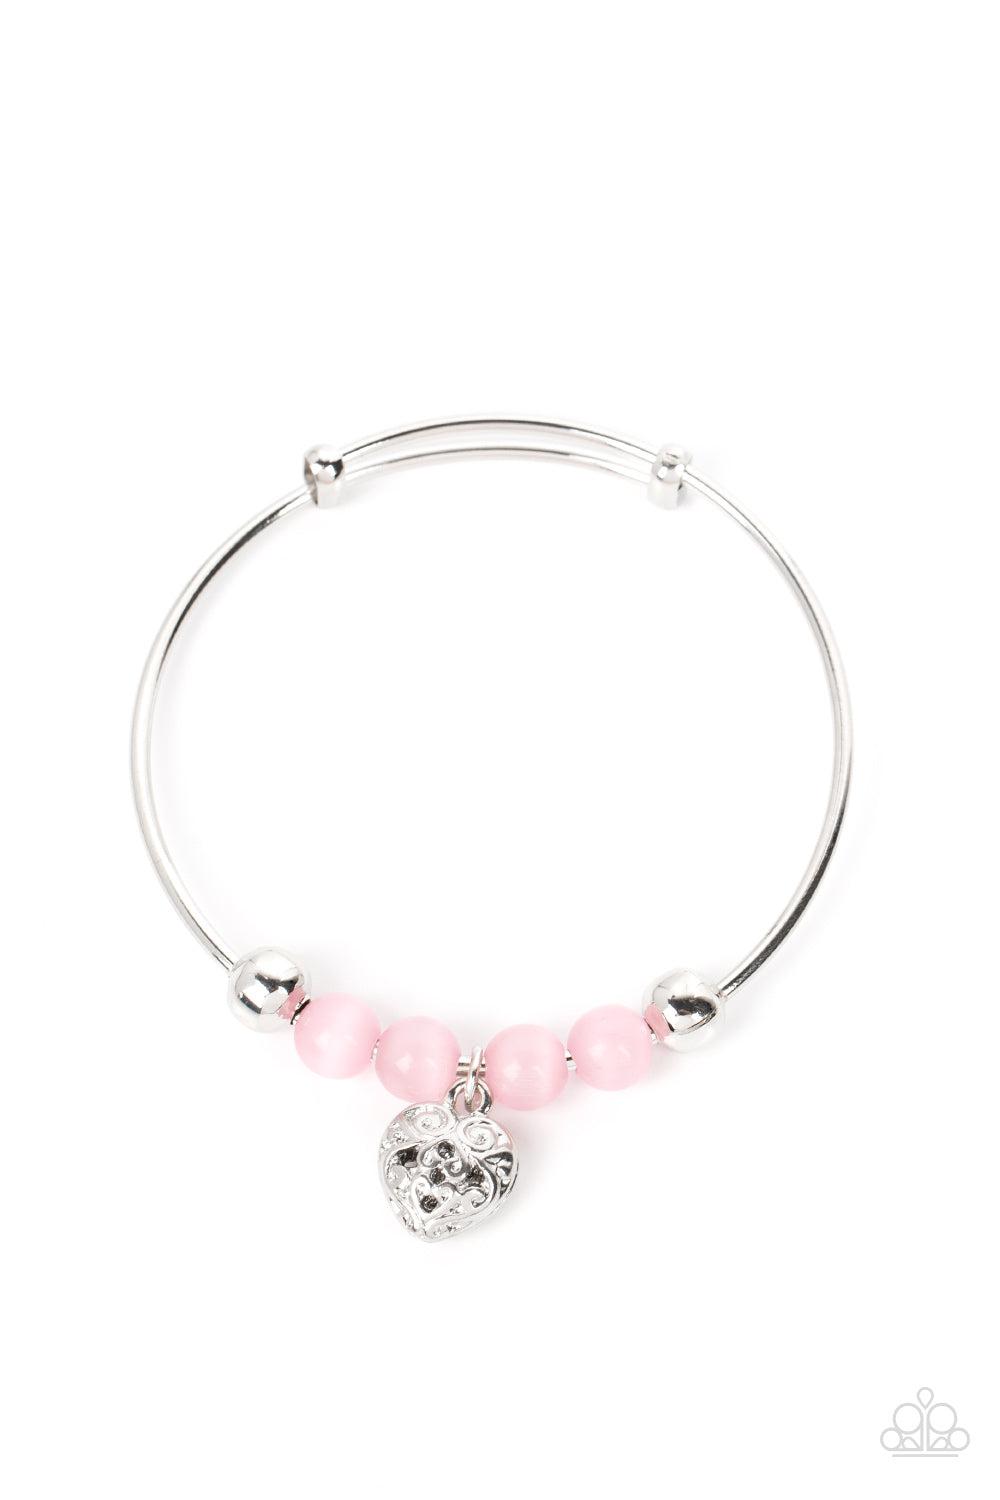 Vintage Vows Pink Heart Charm Bangle Bracelet - Paparazzi Accessories- lightbox - CarasShop.com - $5 Jewelry by Cara Jewels